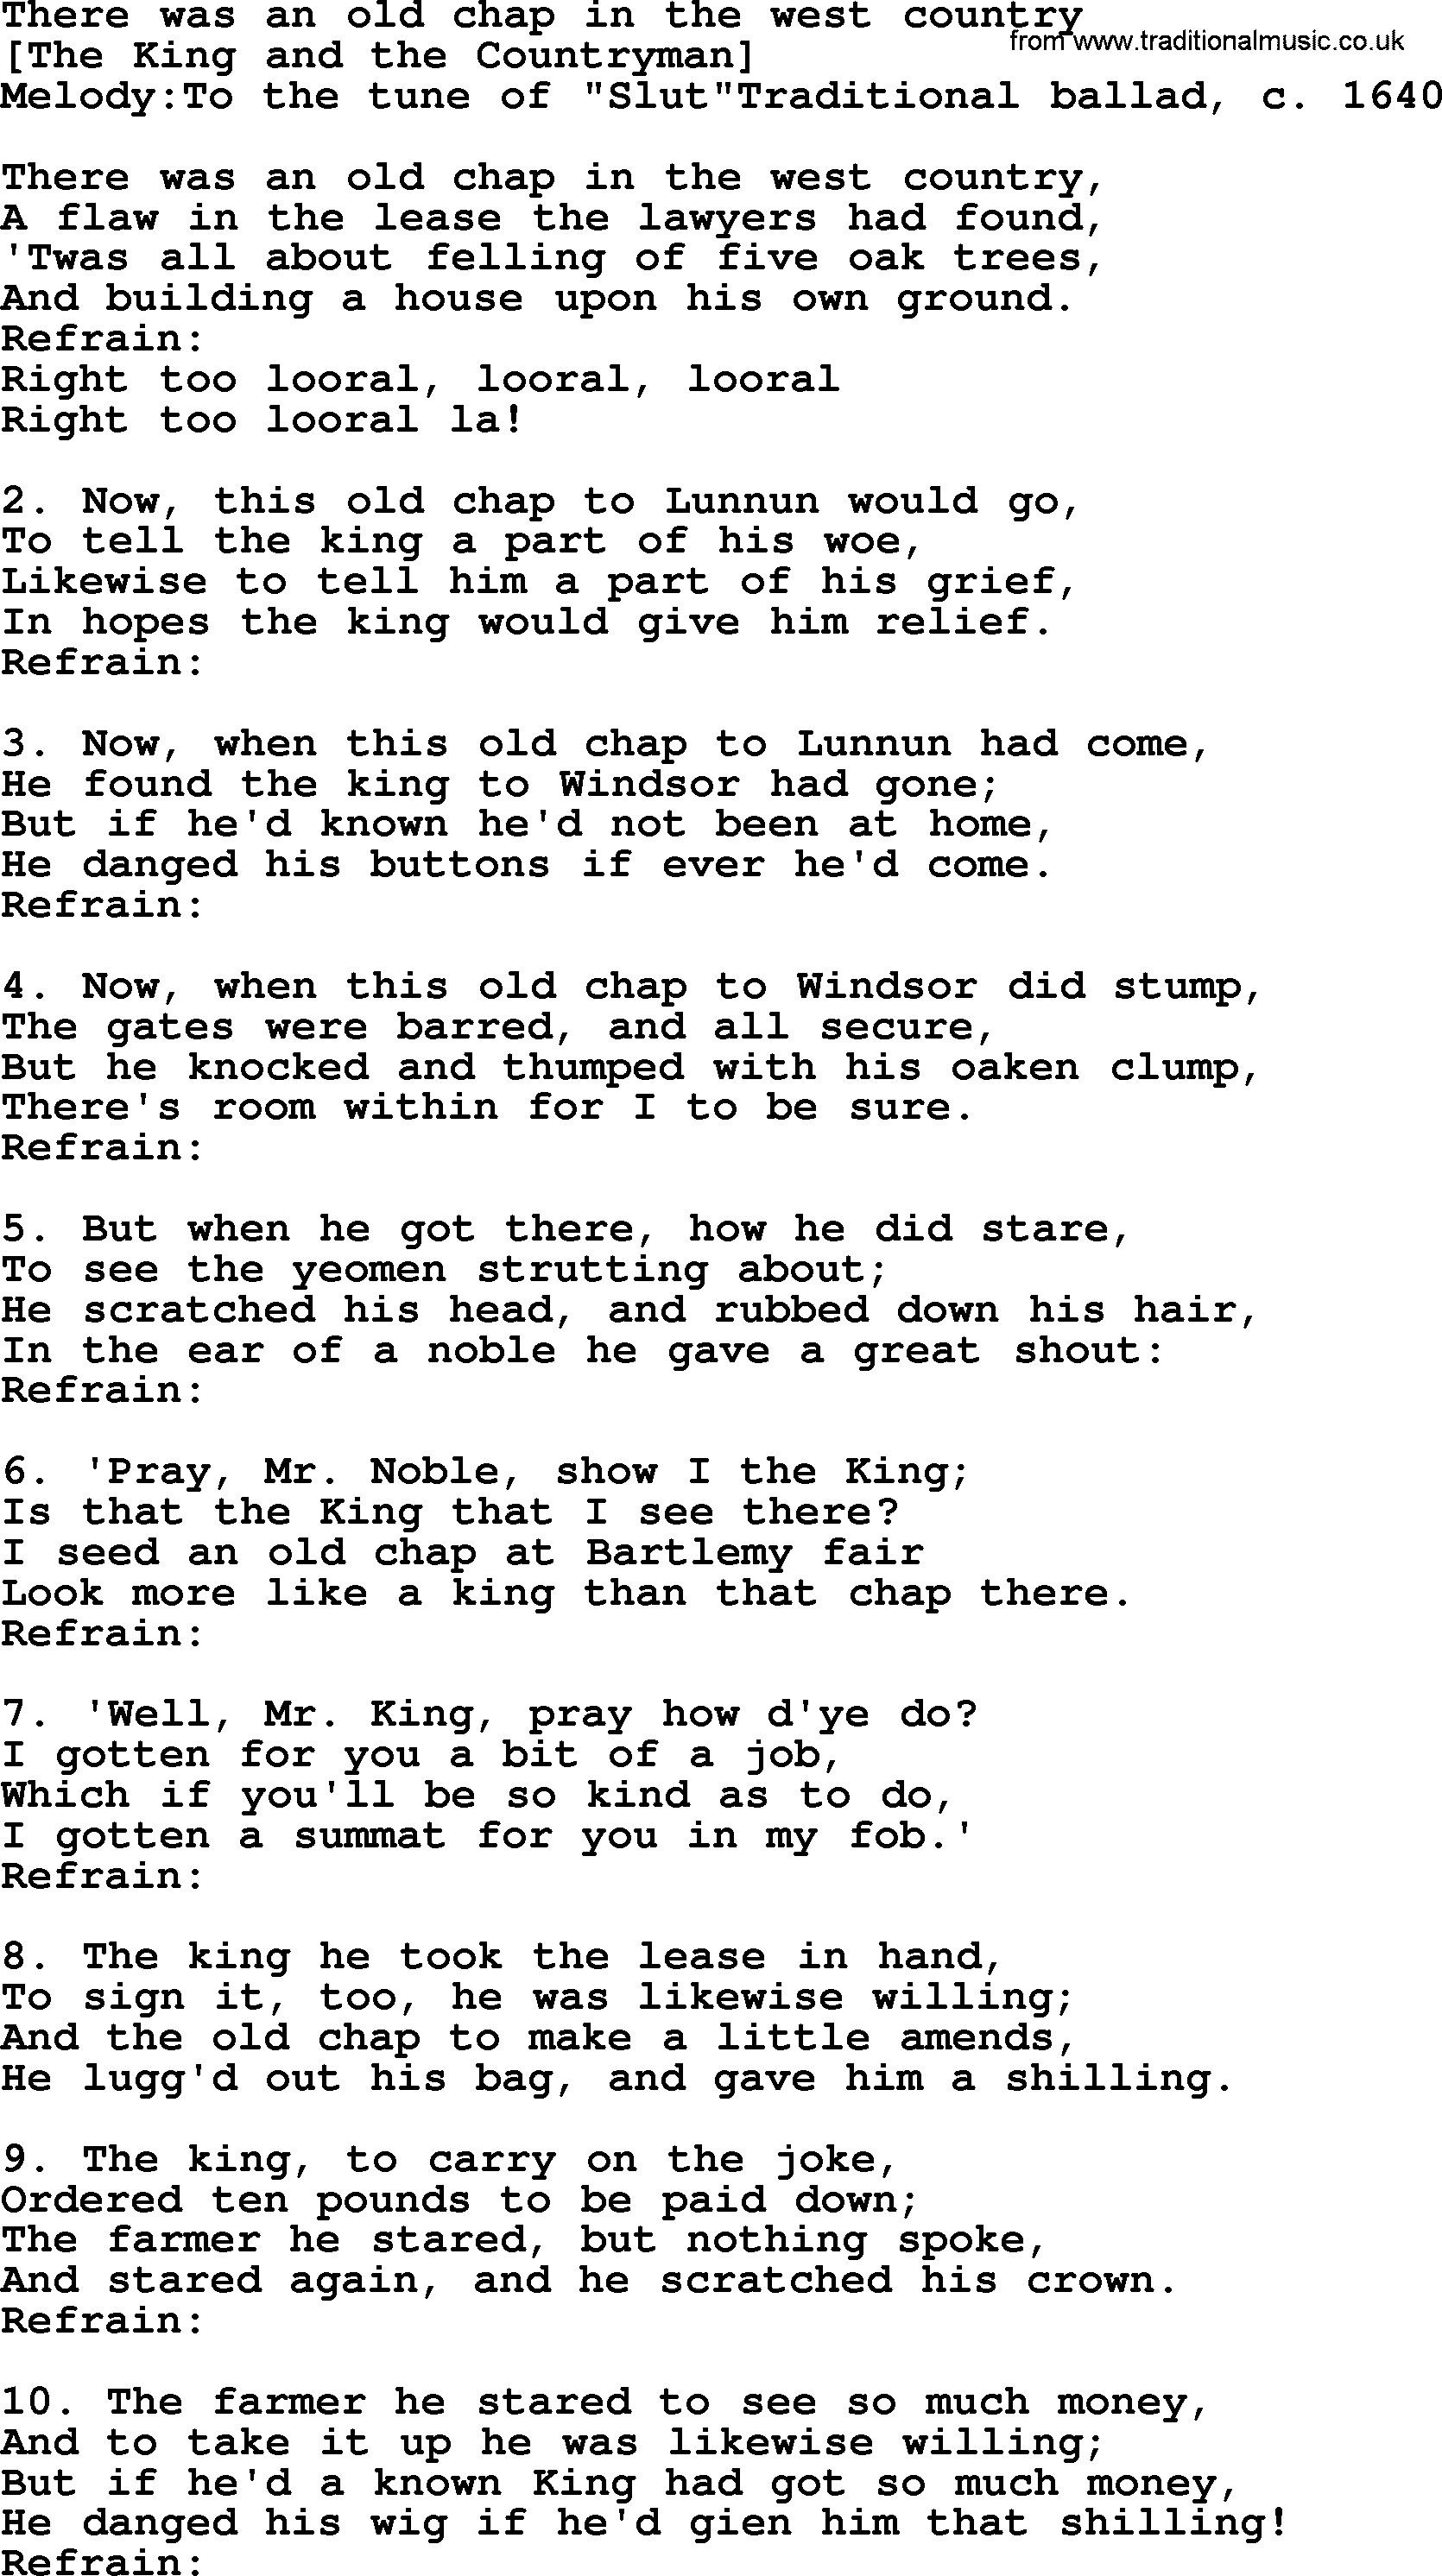 Old English Song: There Was An Old Chap In The West Country lyrics